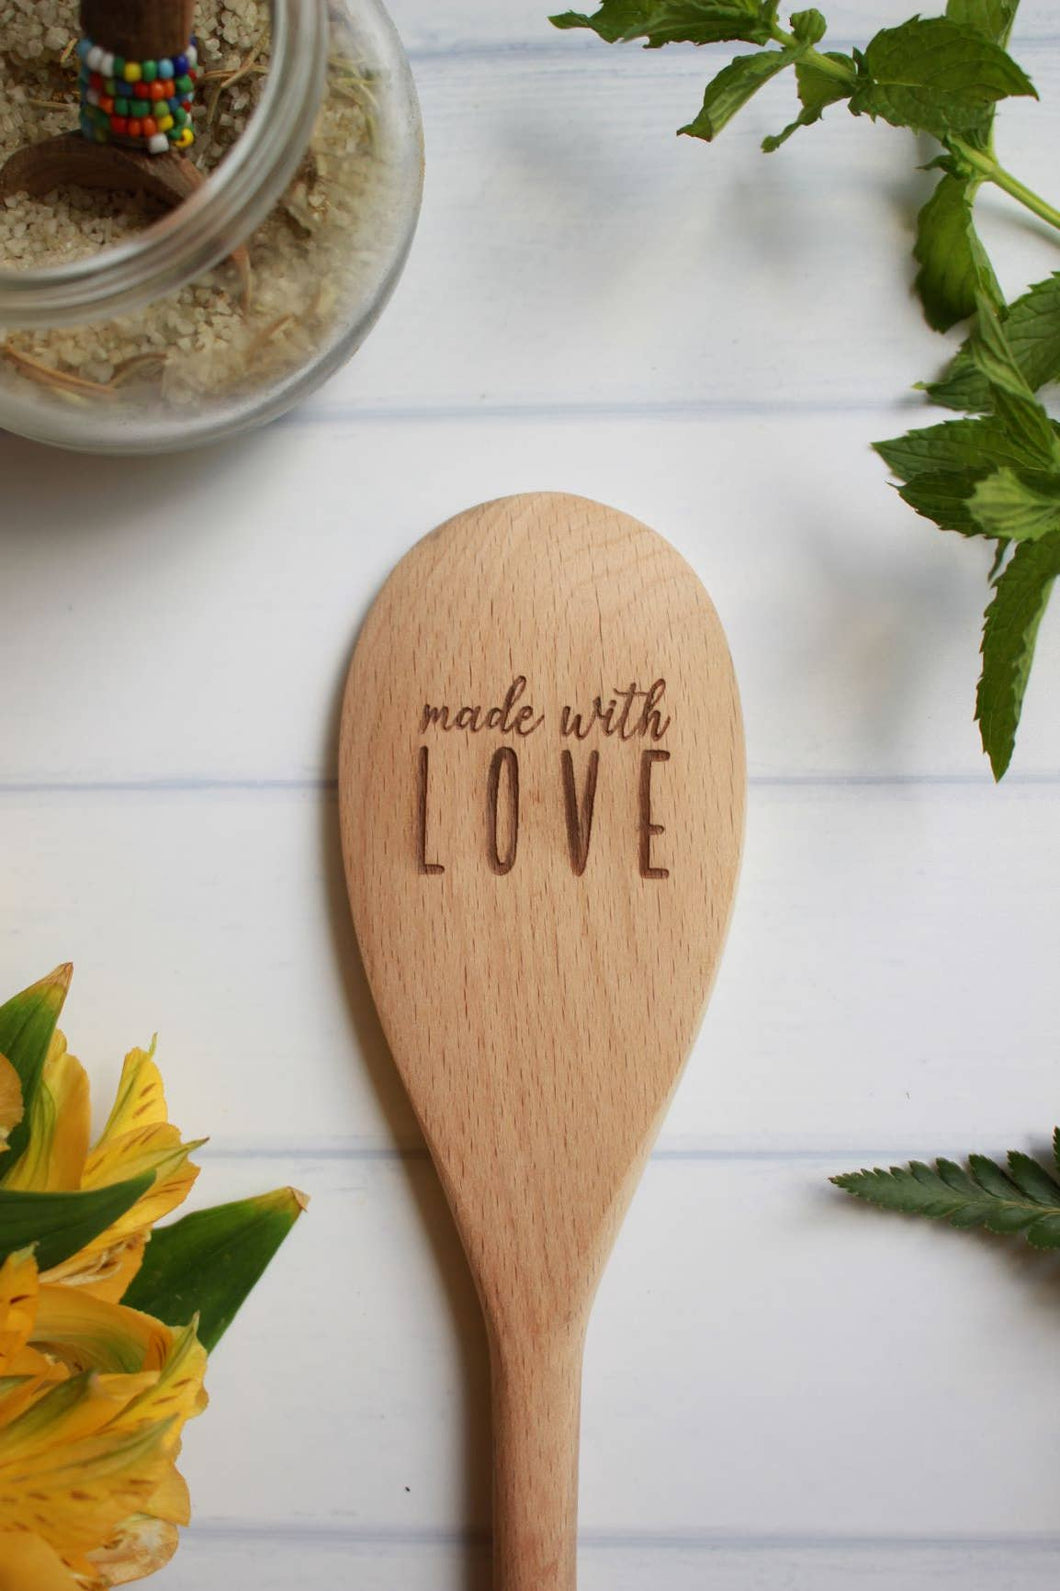 SALE! Made With Love Wooden Spoon